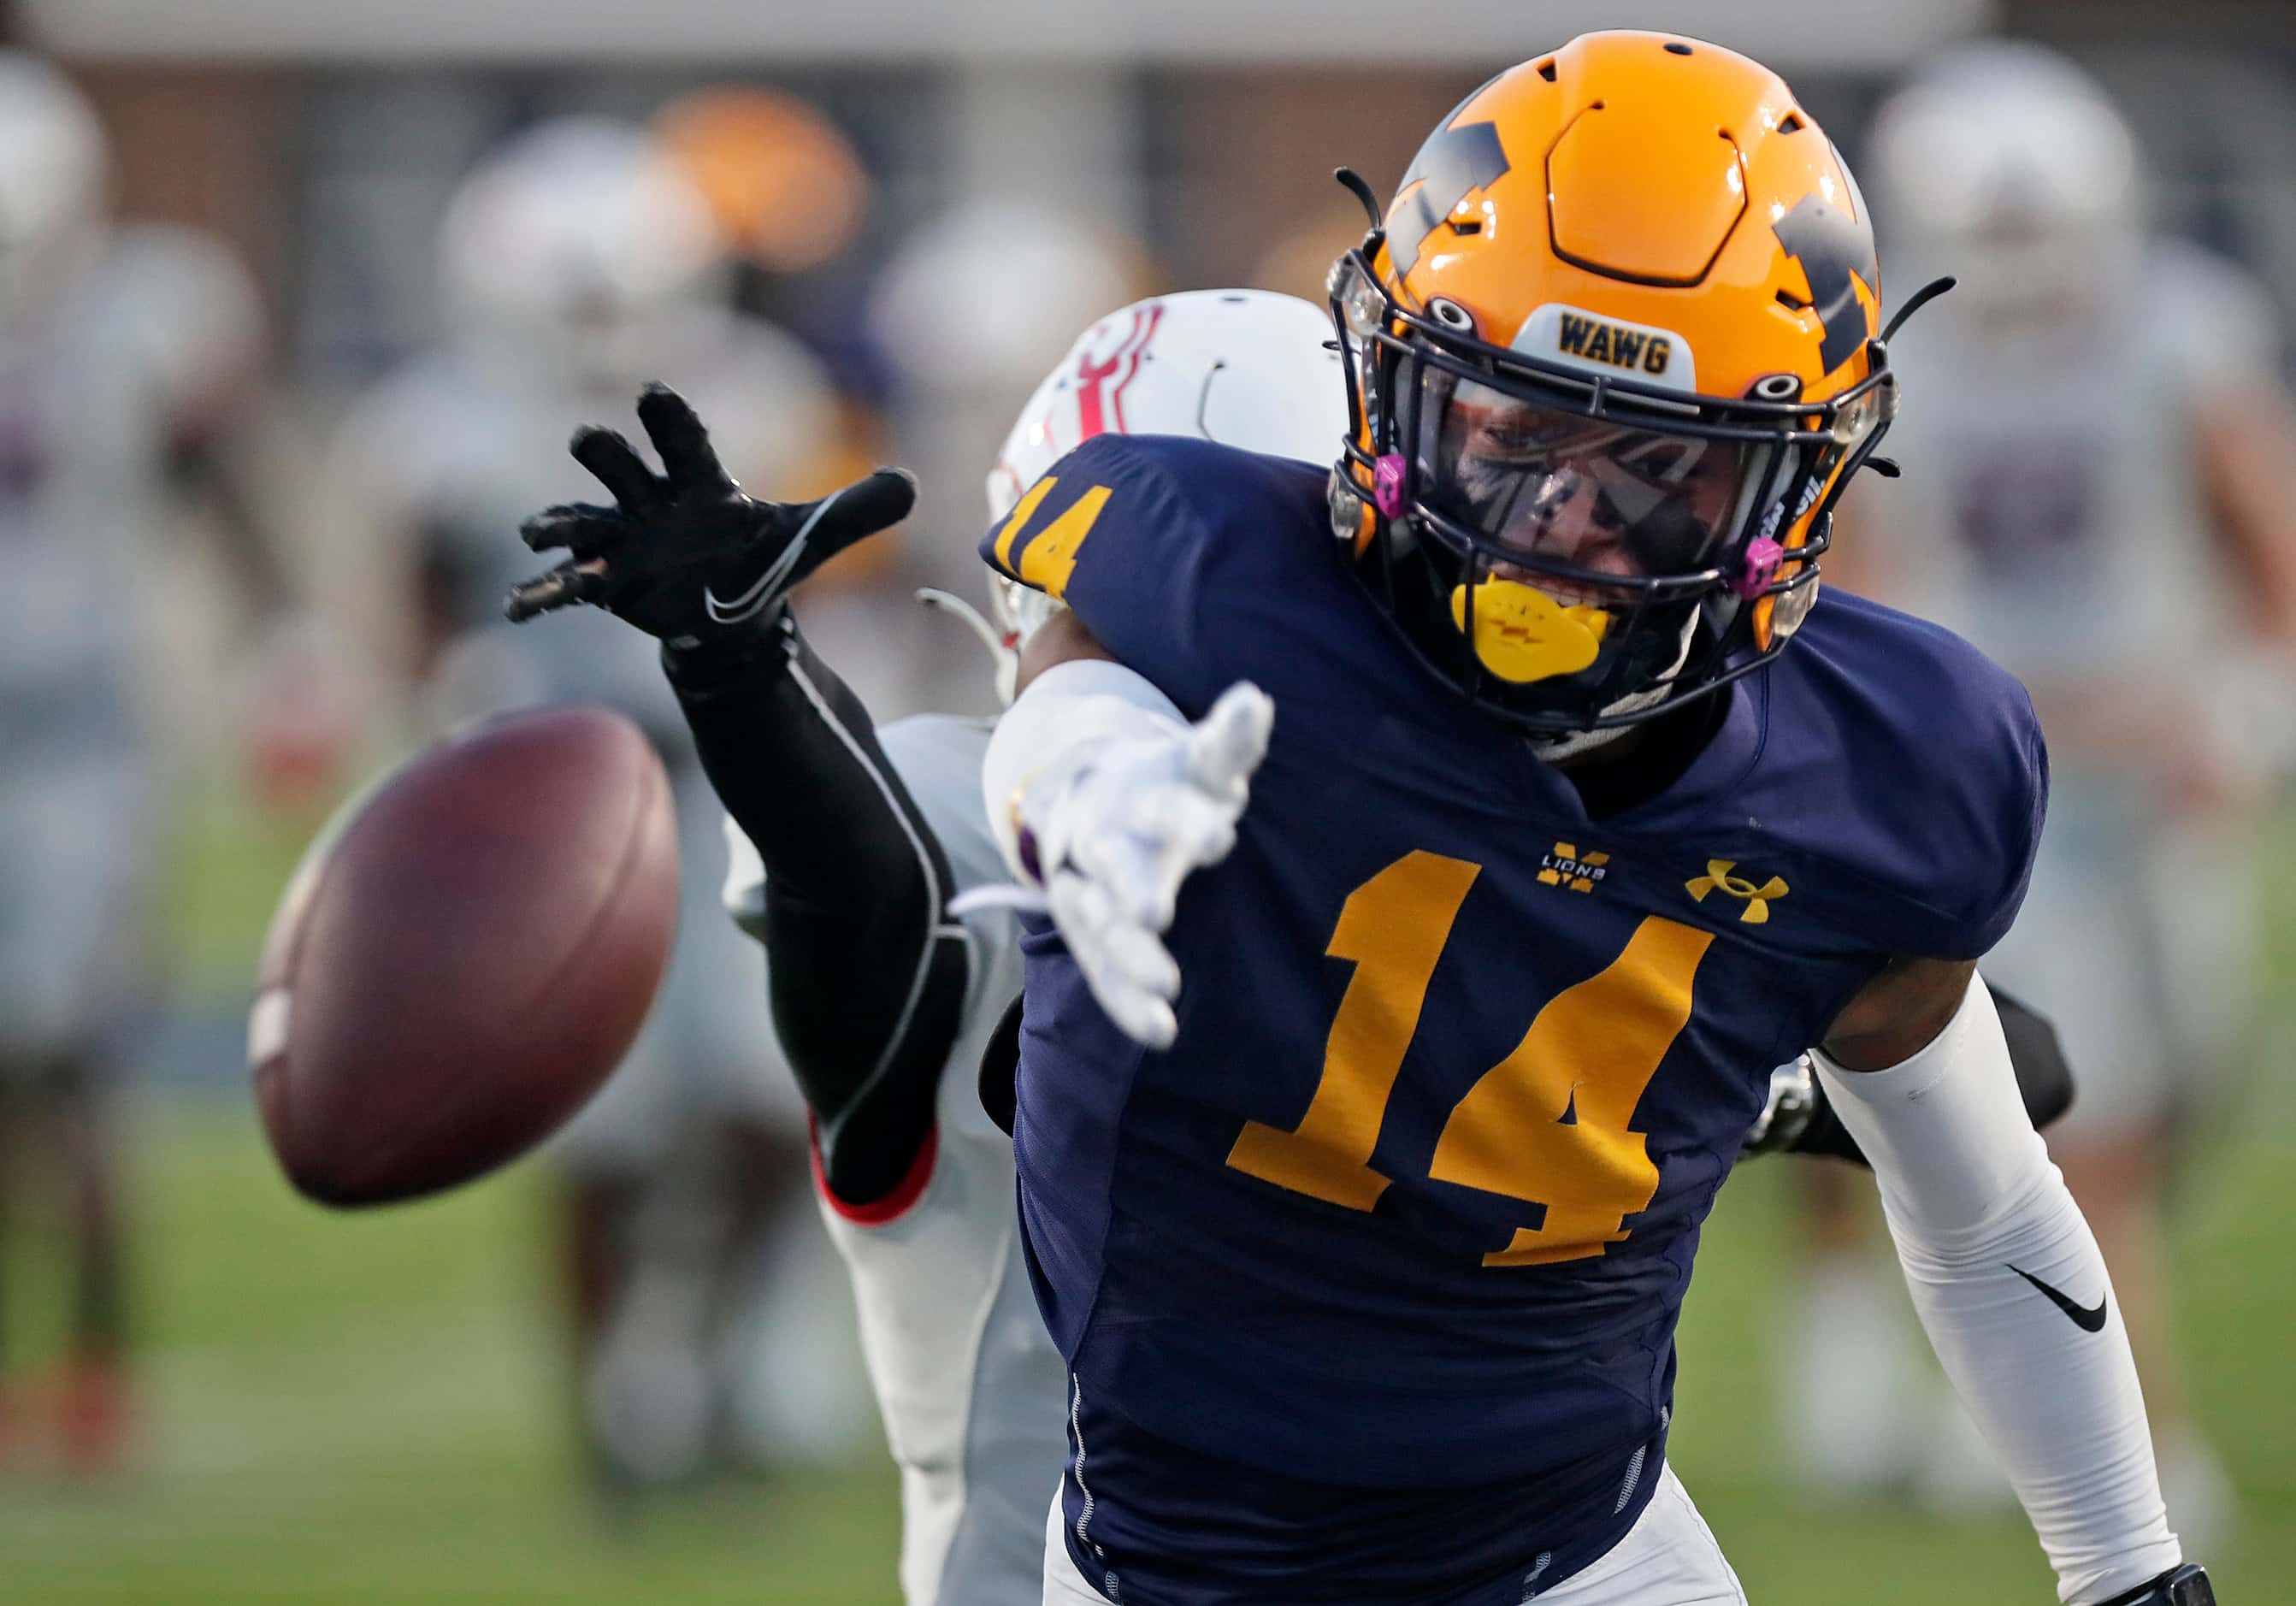 The pass was just out of reach for McKinney High School wide receiver Khali Best (14) as...